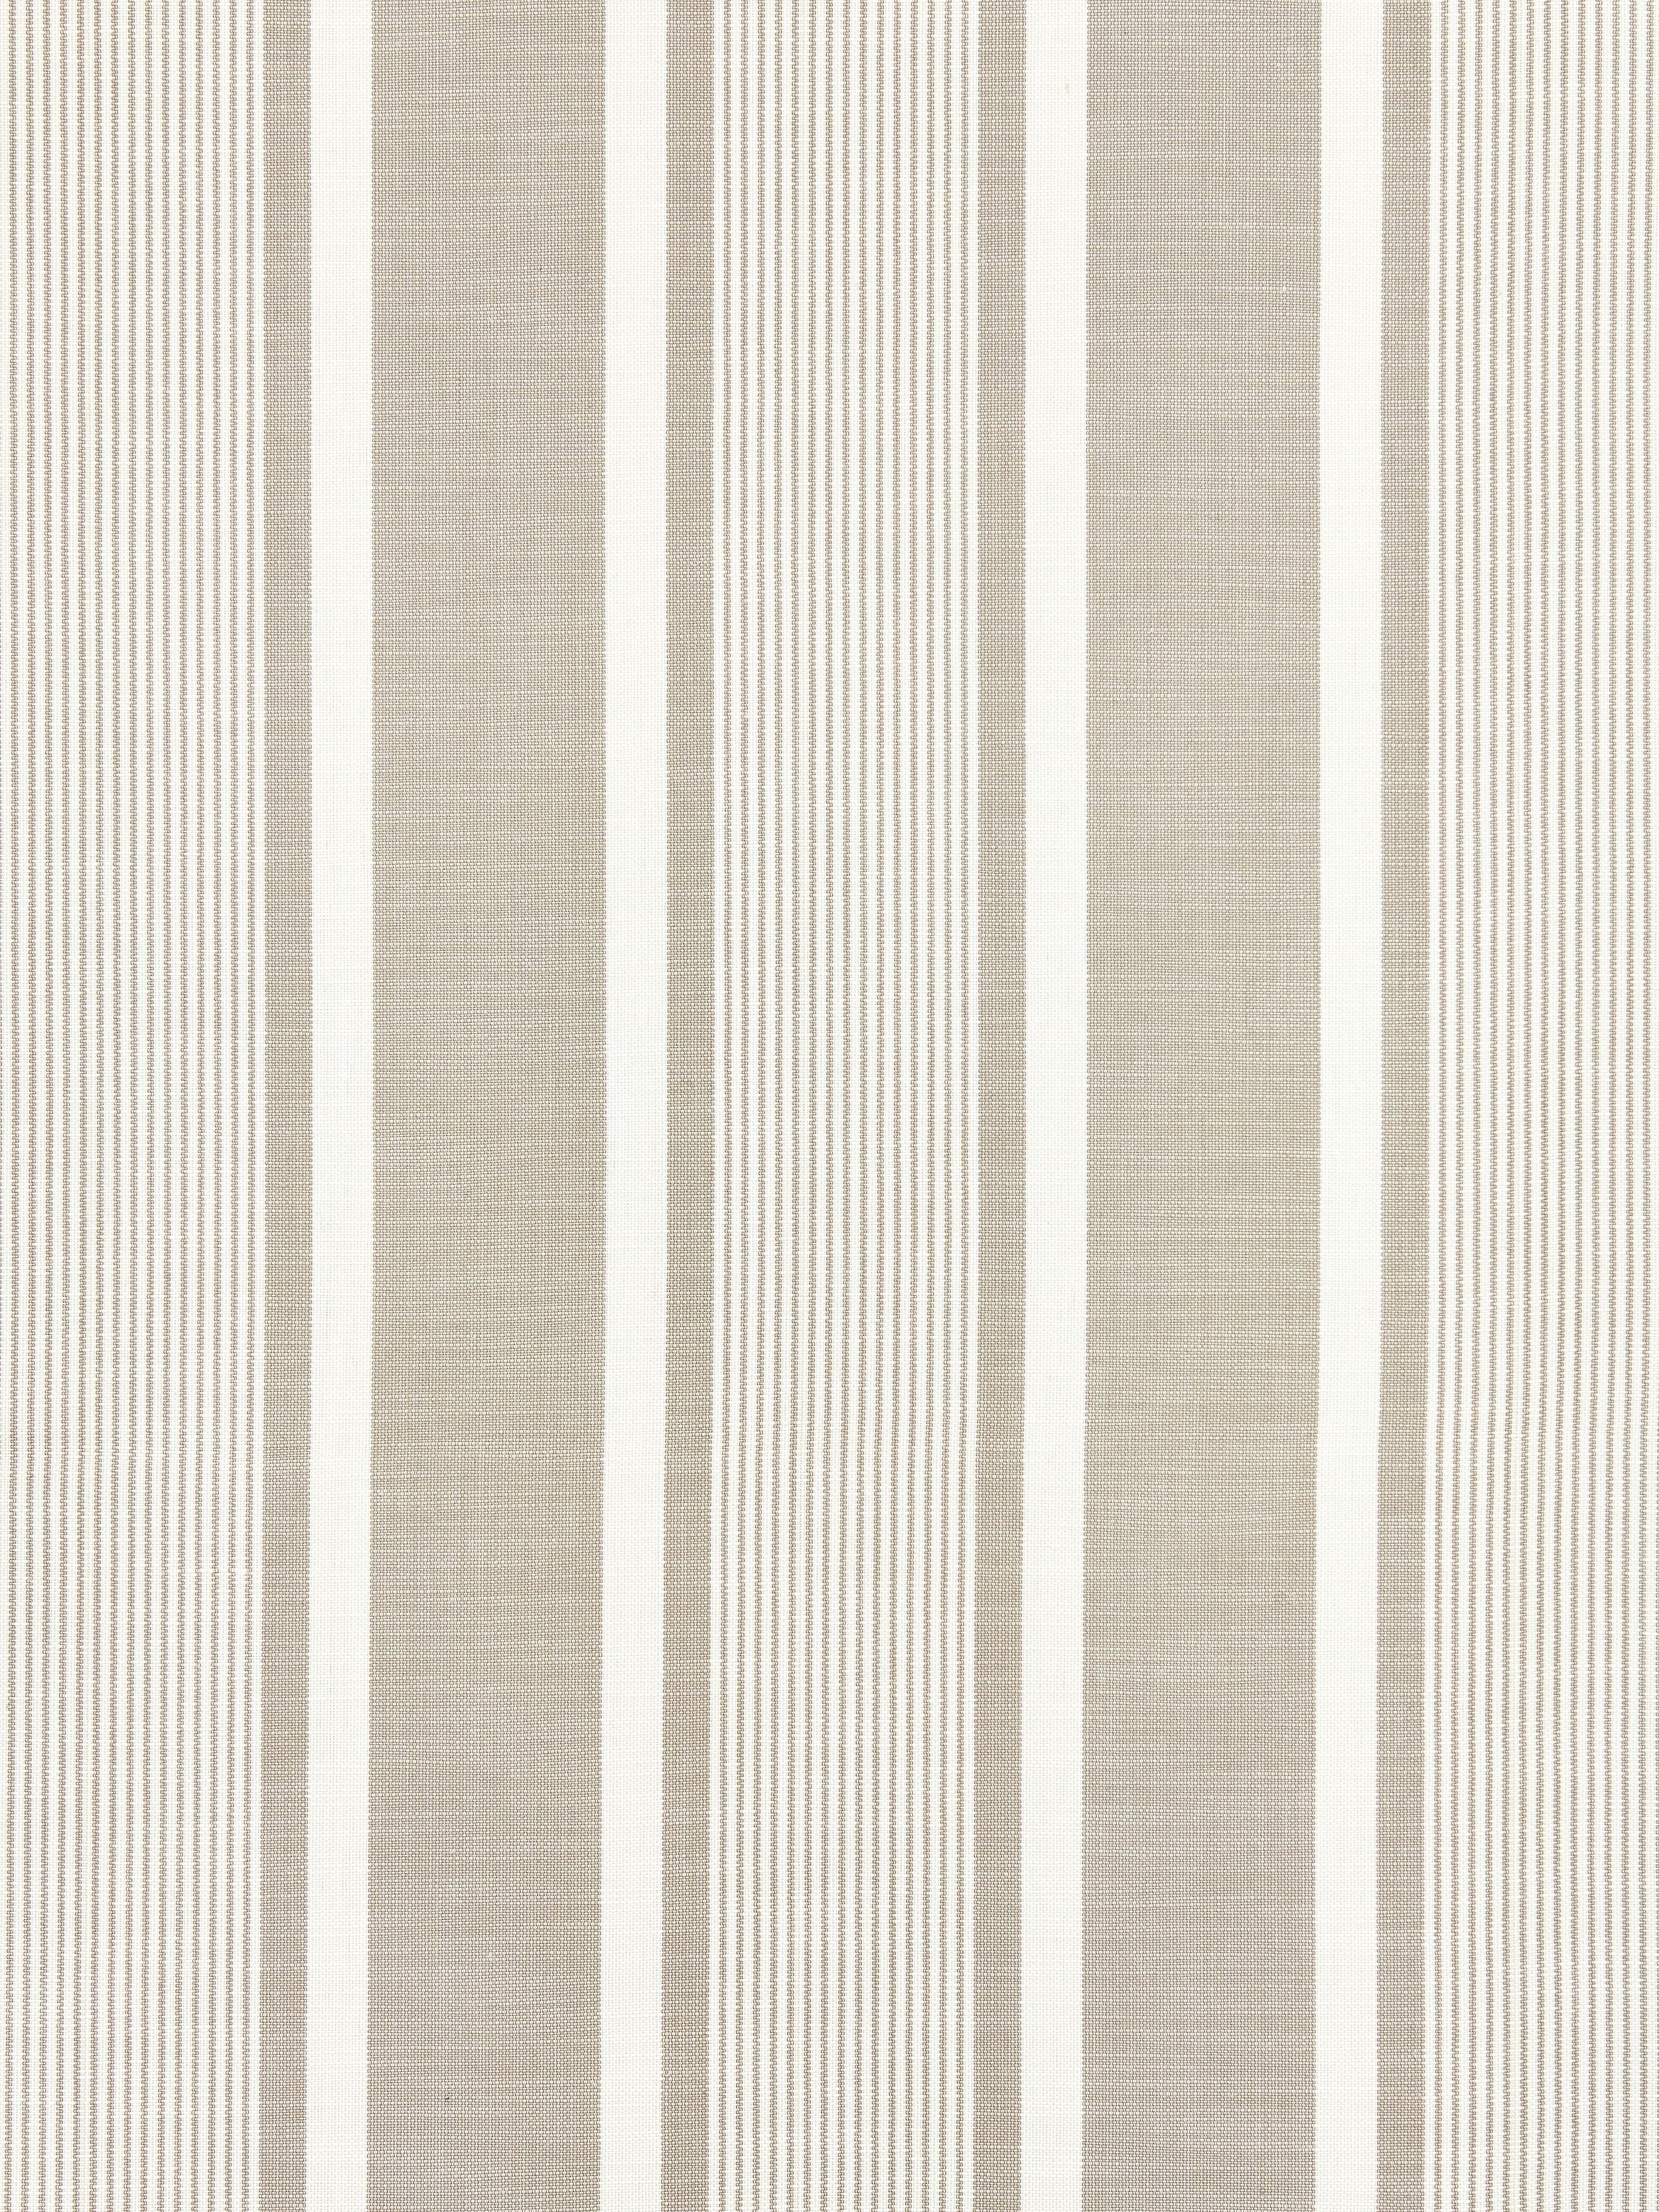 Wellfleet Stripe fabric in linen color - pattern number SC 000127111 - by Scalamandre in the Scalamandre Fabrics Book 1 collection